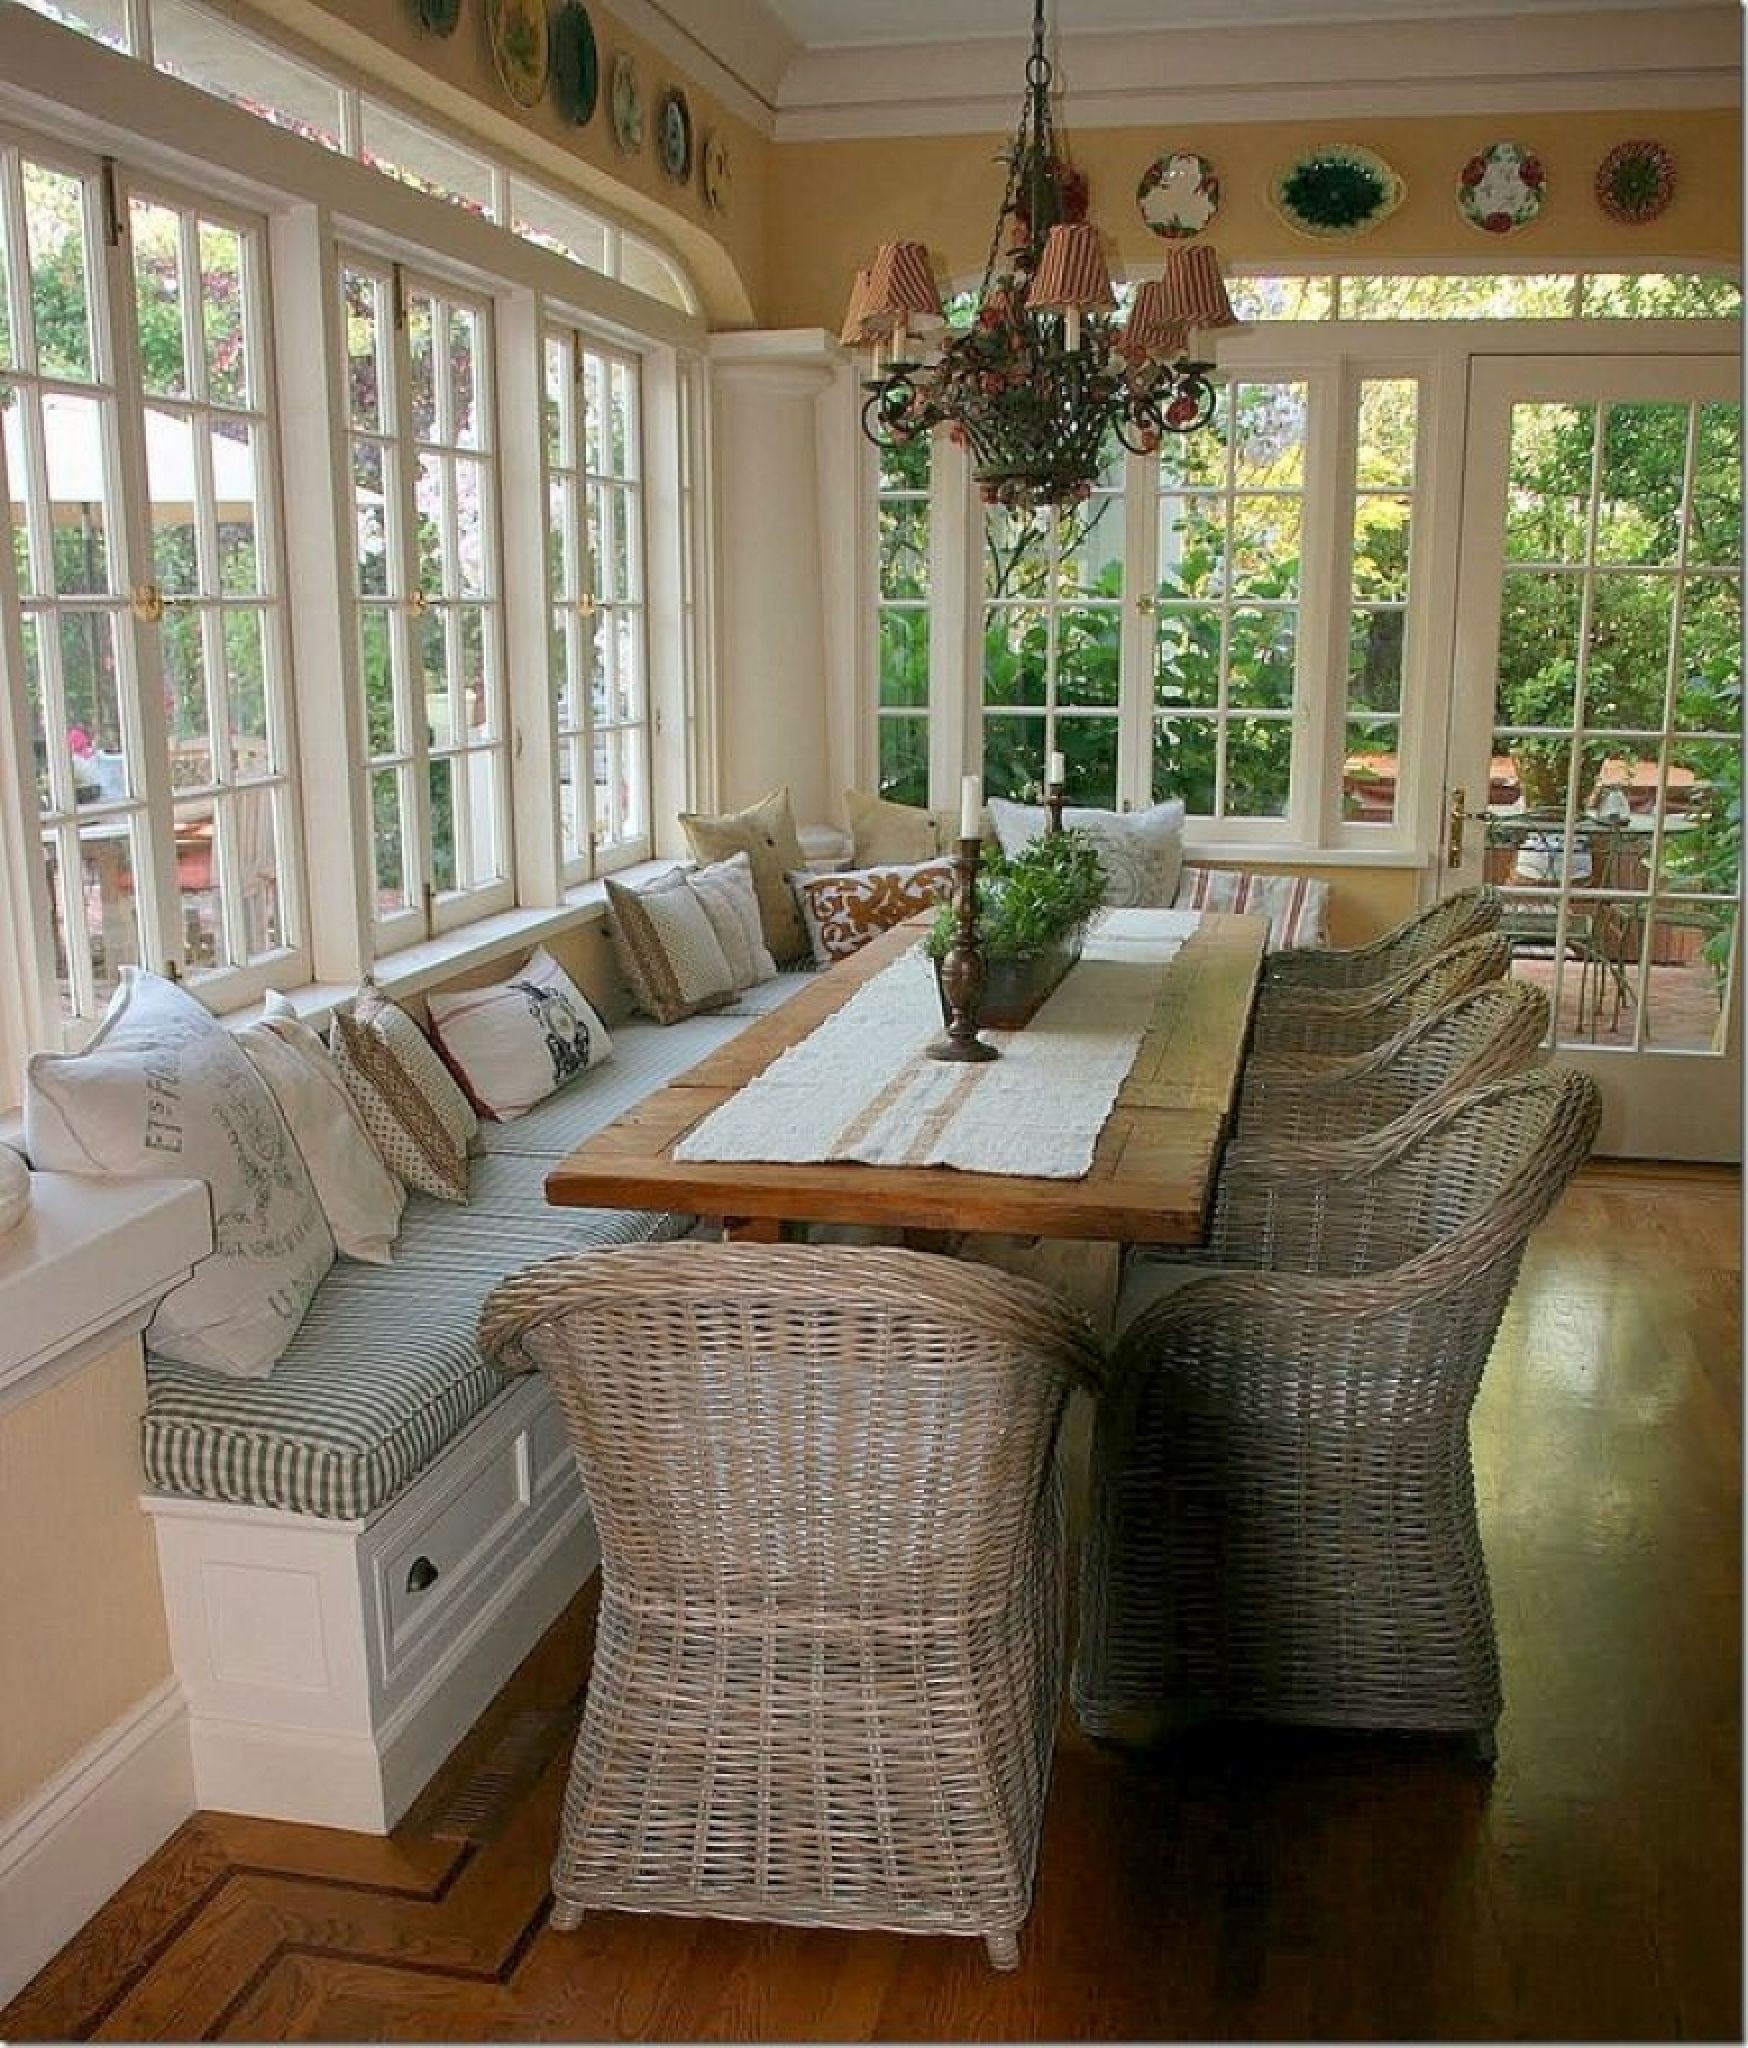 Screened in porch with built in bench seating could use